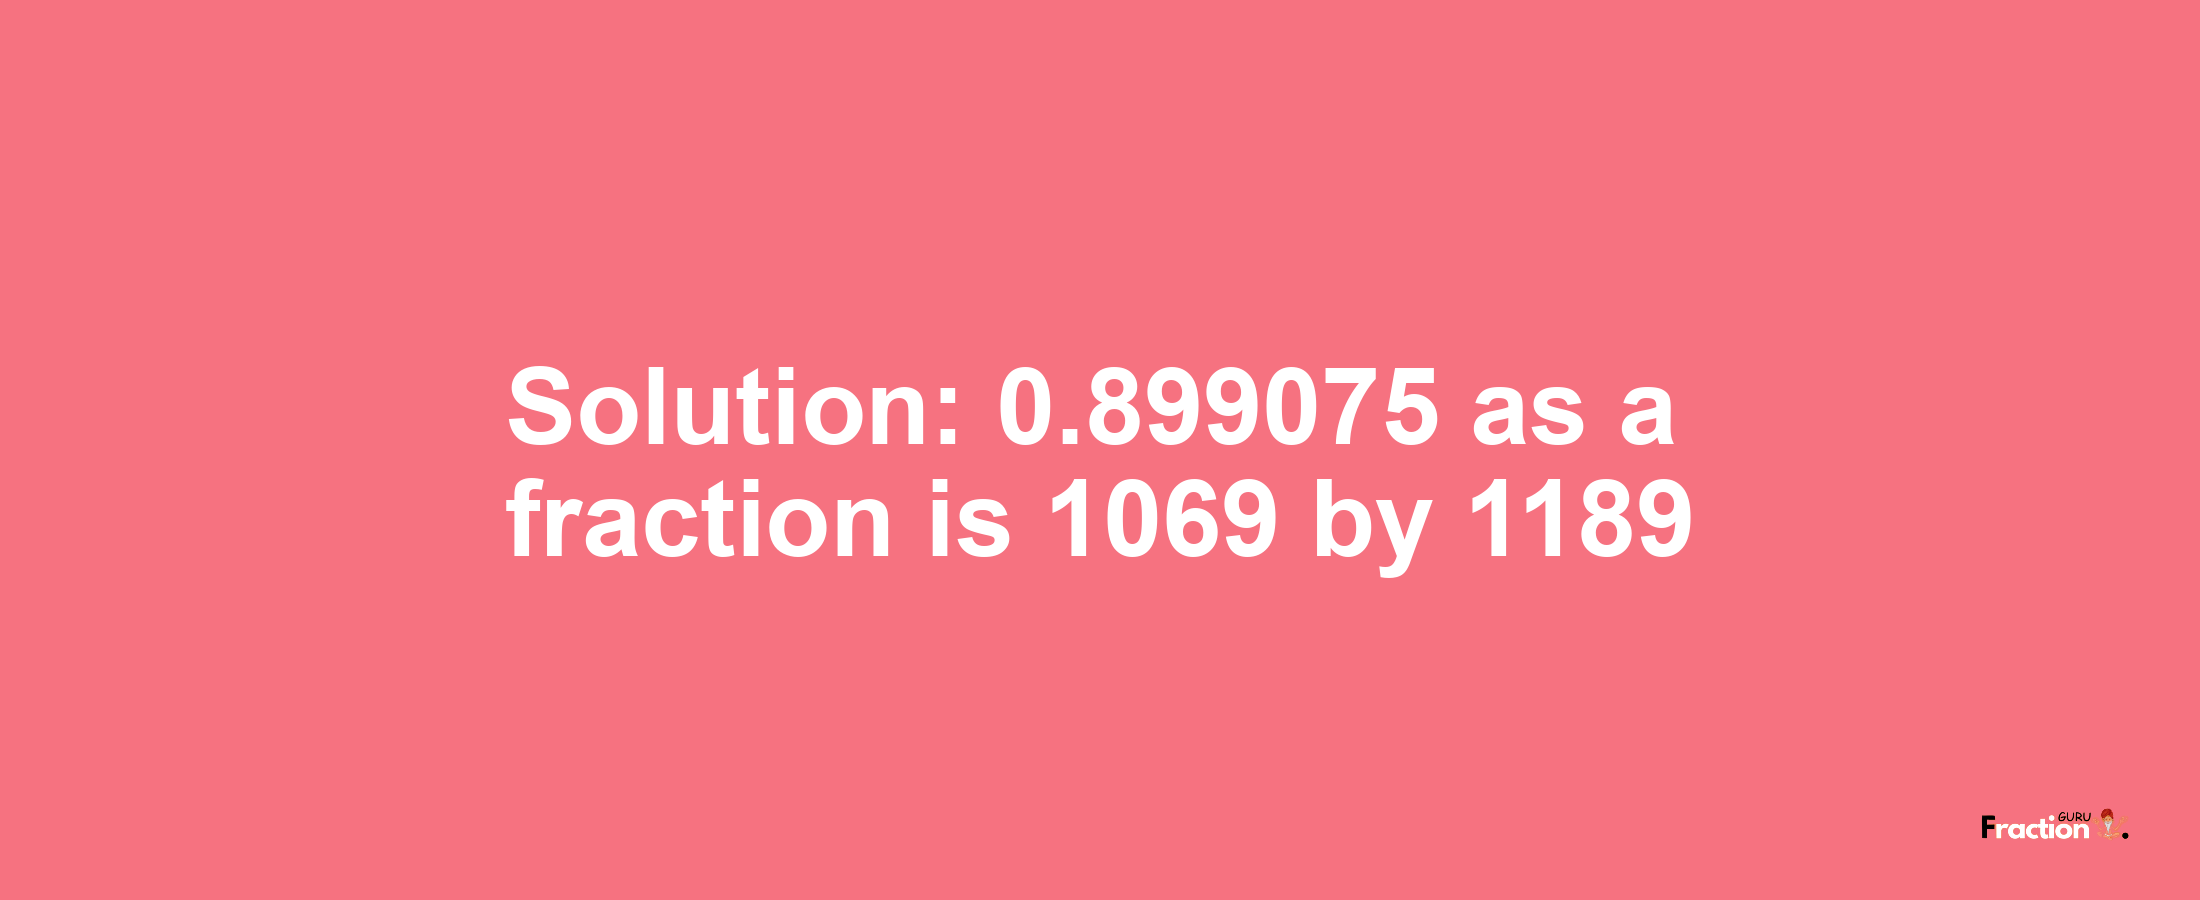 Solution:0.899075 as a fraction is 1069/1189